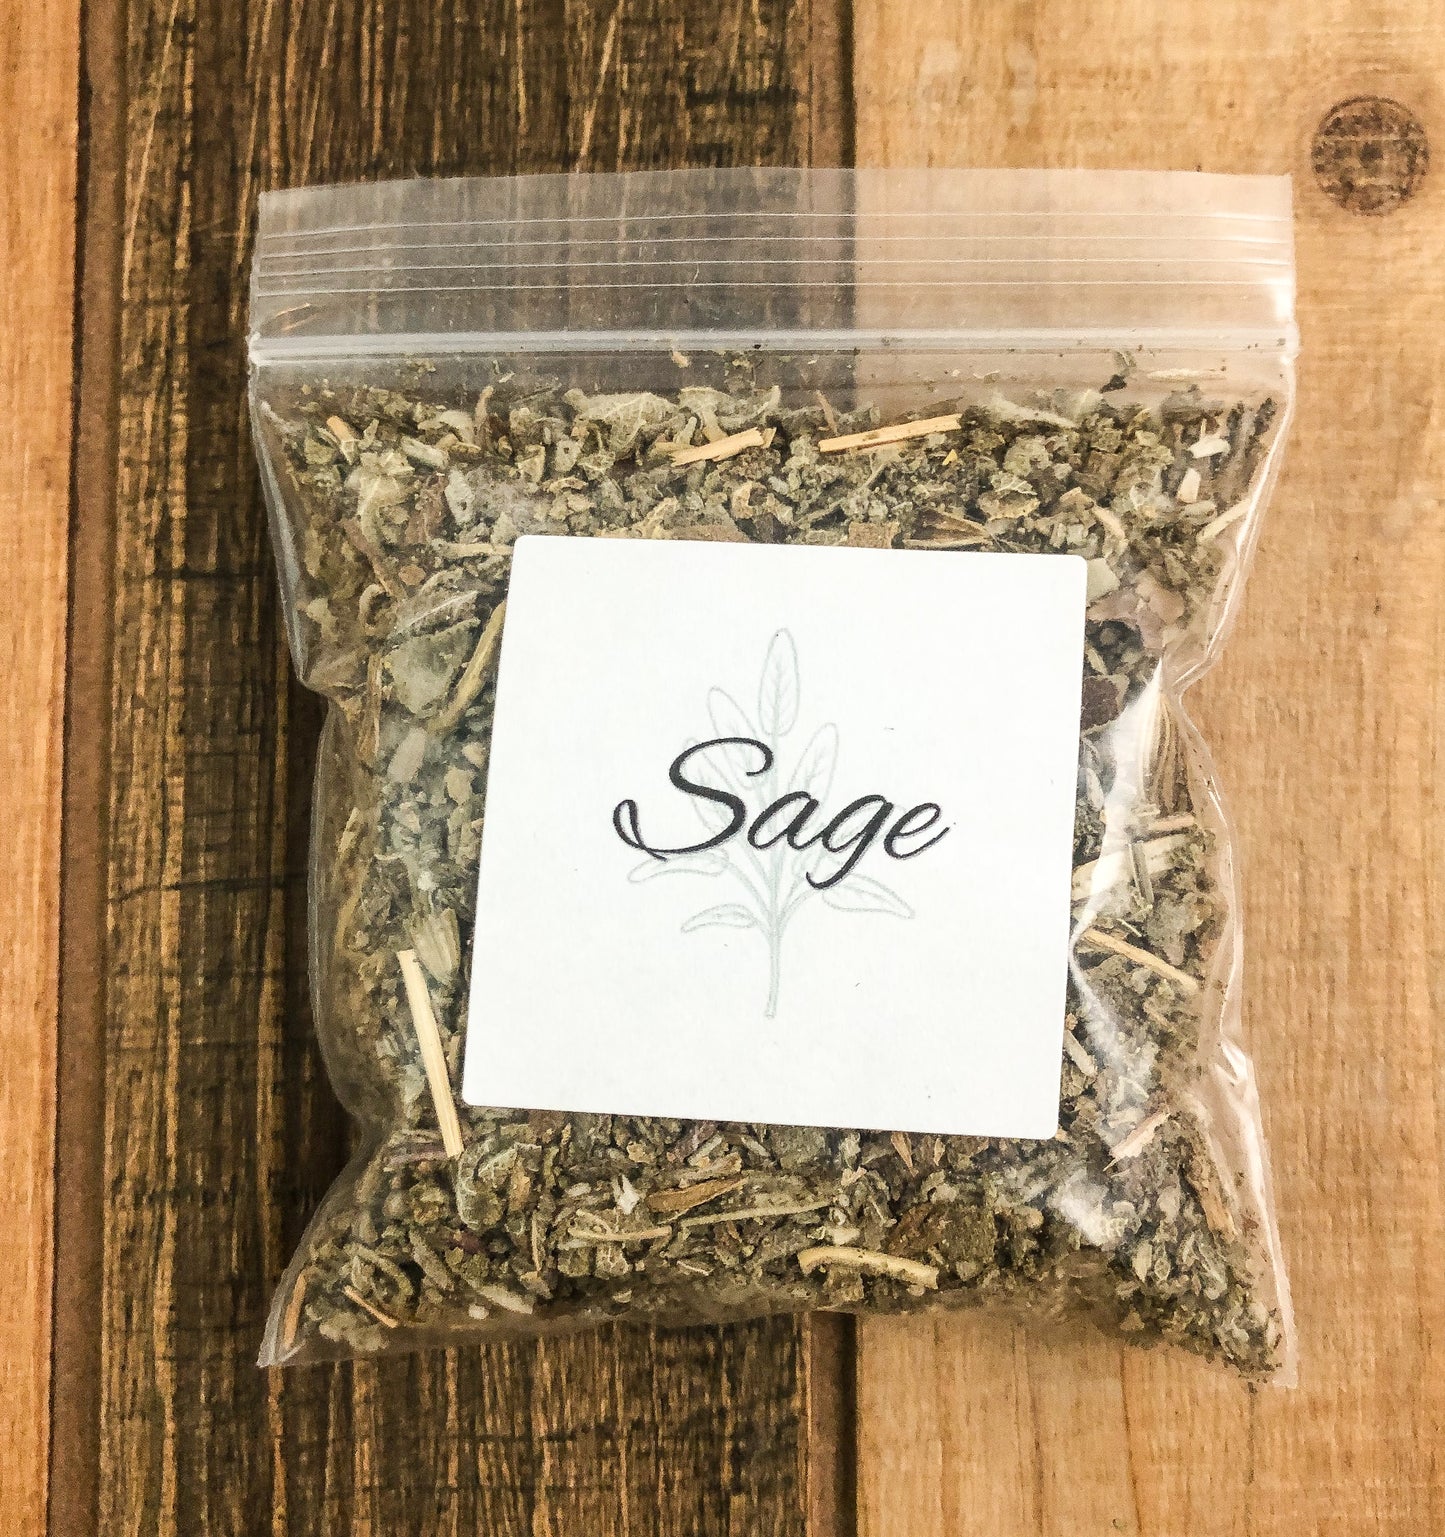 8g bag of dried sage in a clear plastic bag with a wooden background